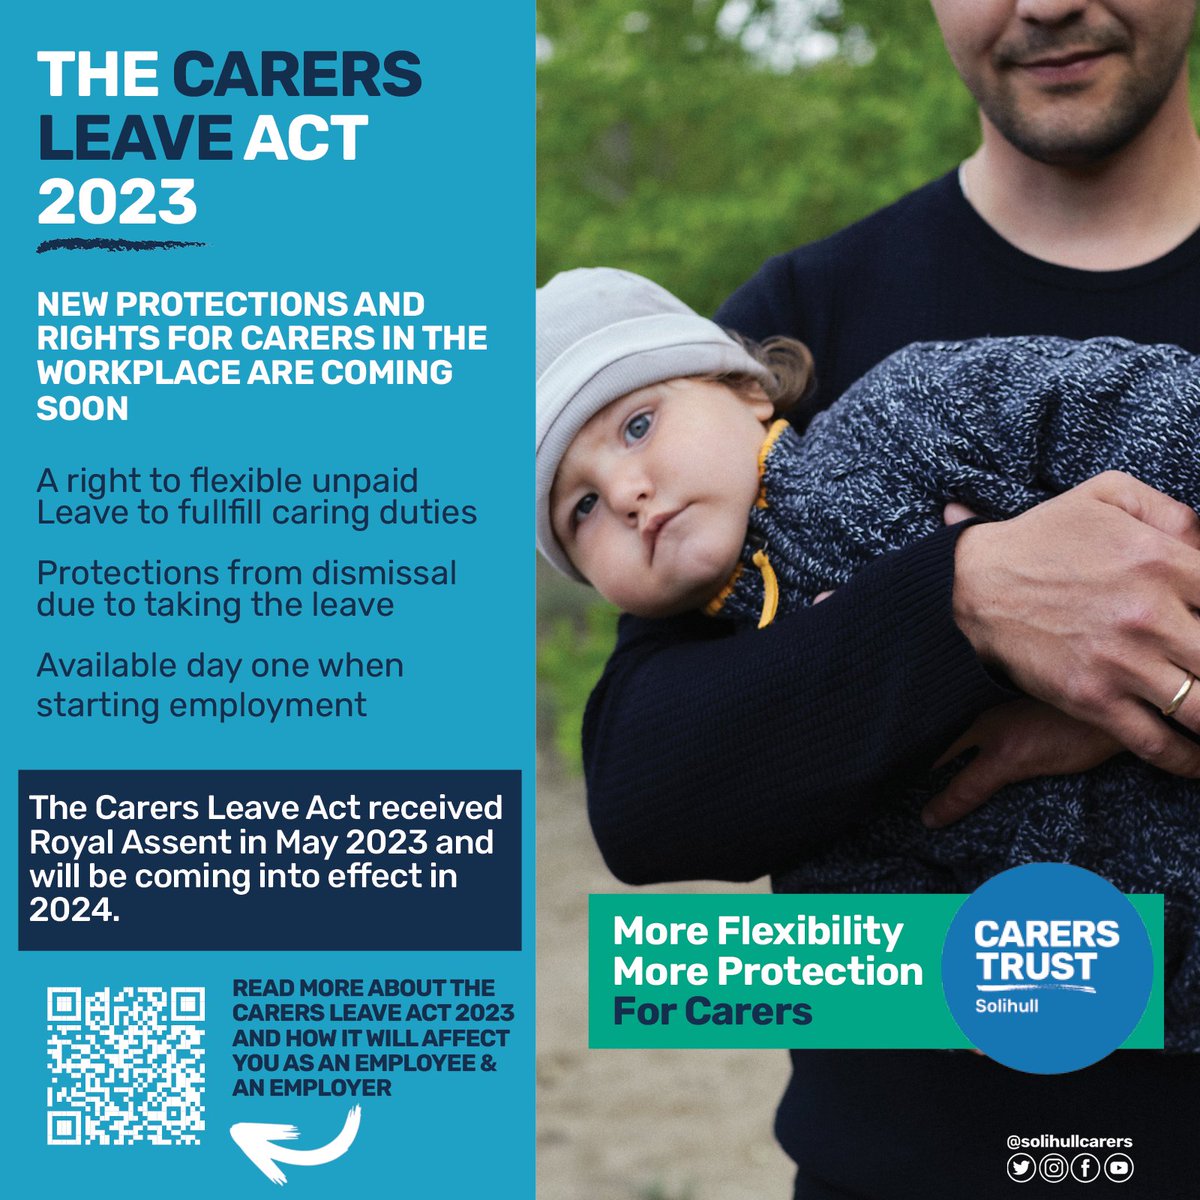 Great news for all #unpaidcarers with the passing of the Carers Leave Act 2023! To understand what it means for you then scan the QR or here buff.ly/44DO7nB #unpaidcarers #carers #carersleaveact #carersleave #flexibility #protection #charity #solihull #UK @SolihullCouncil